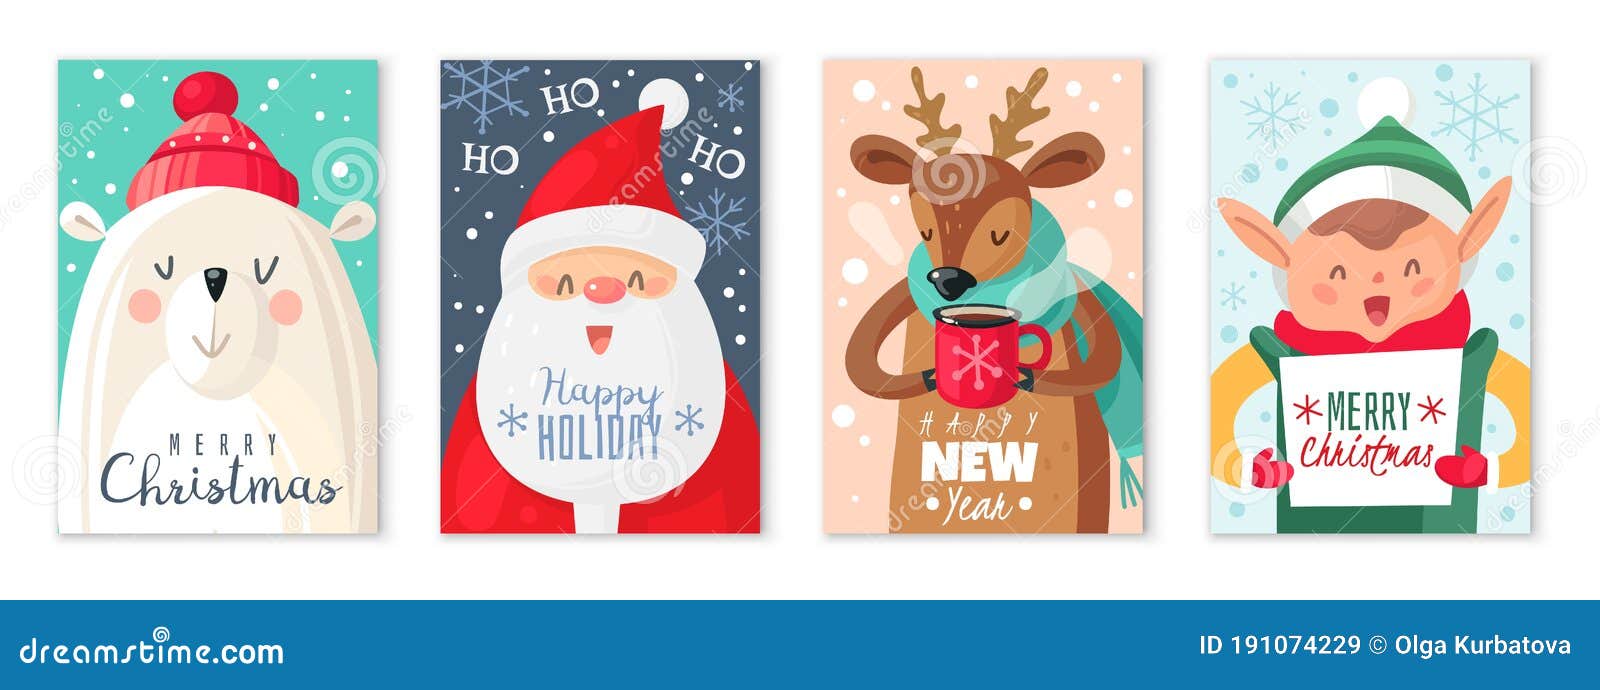 christmas cards. happy merry christmas and new year greeting card with cute santa claus and cute animals, xmas gift